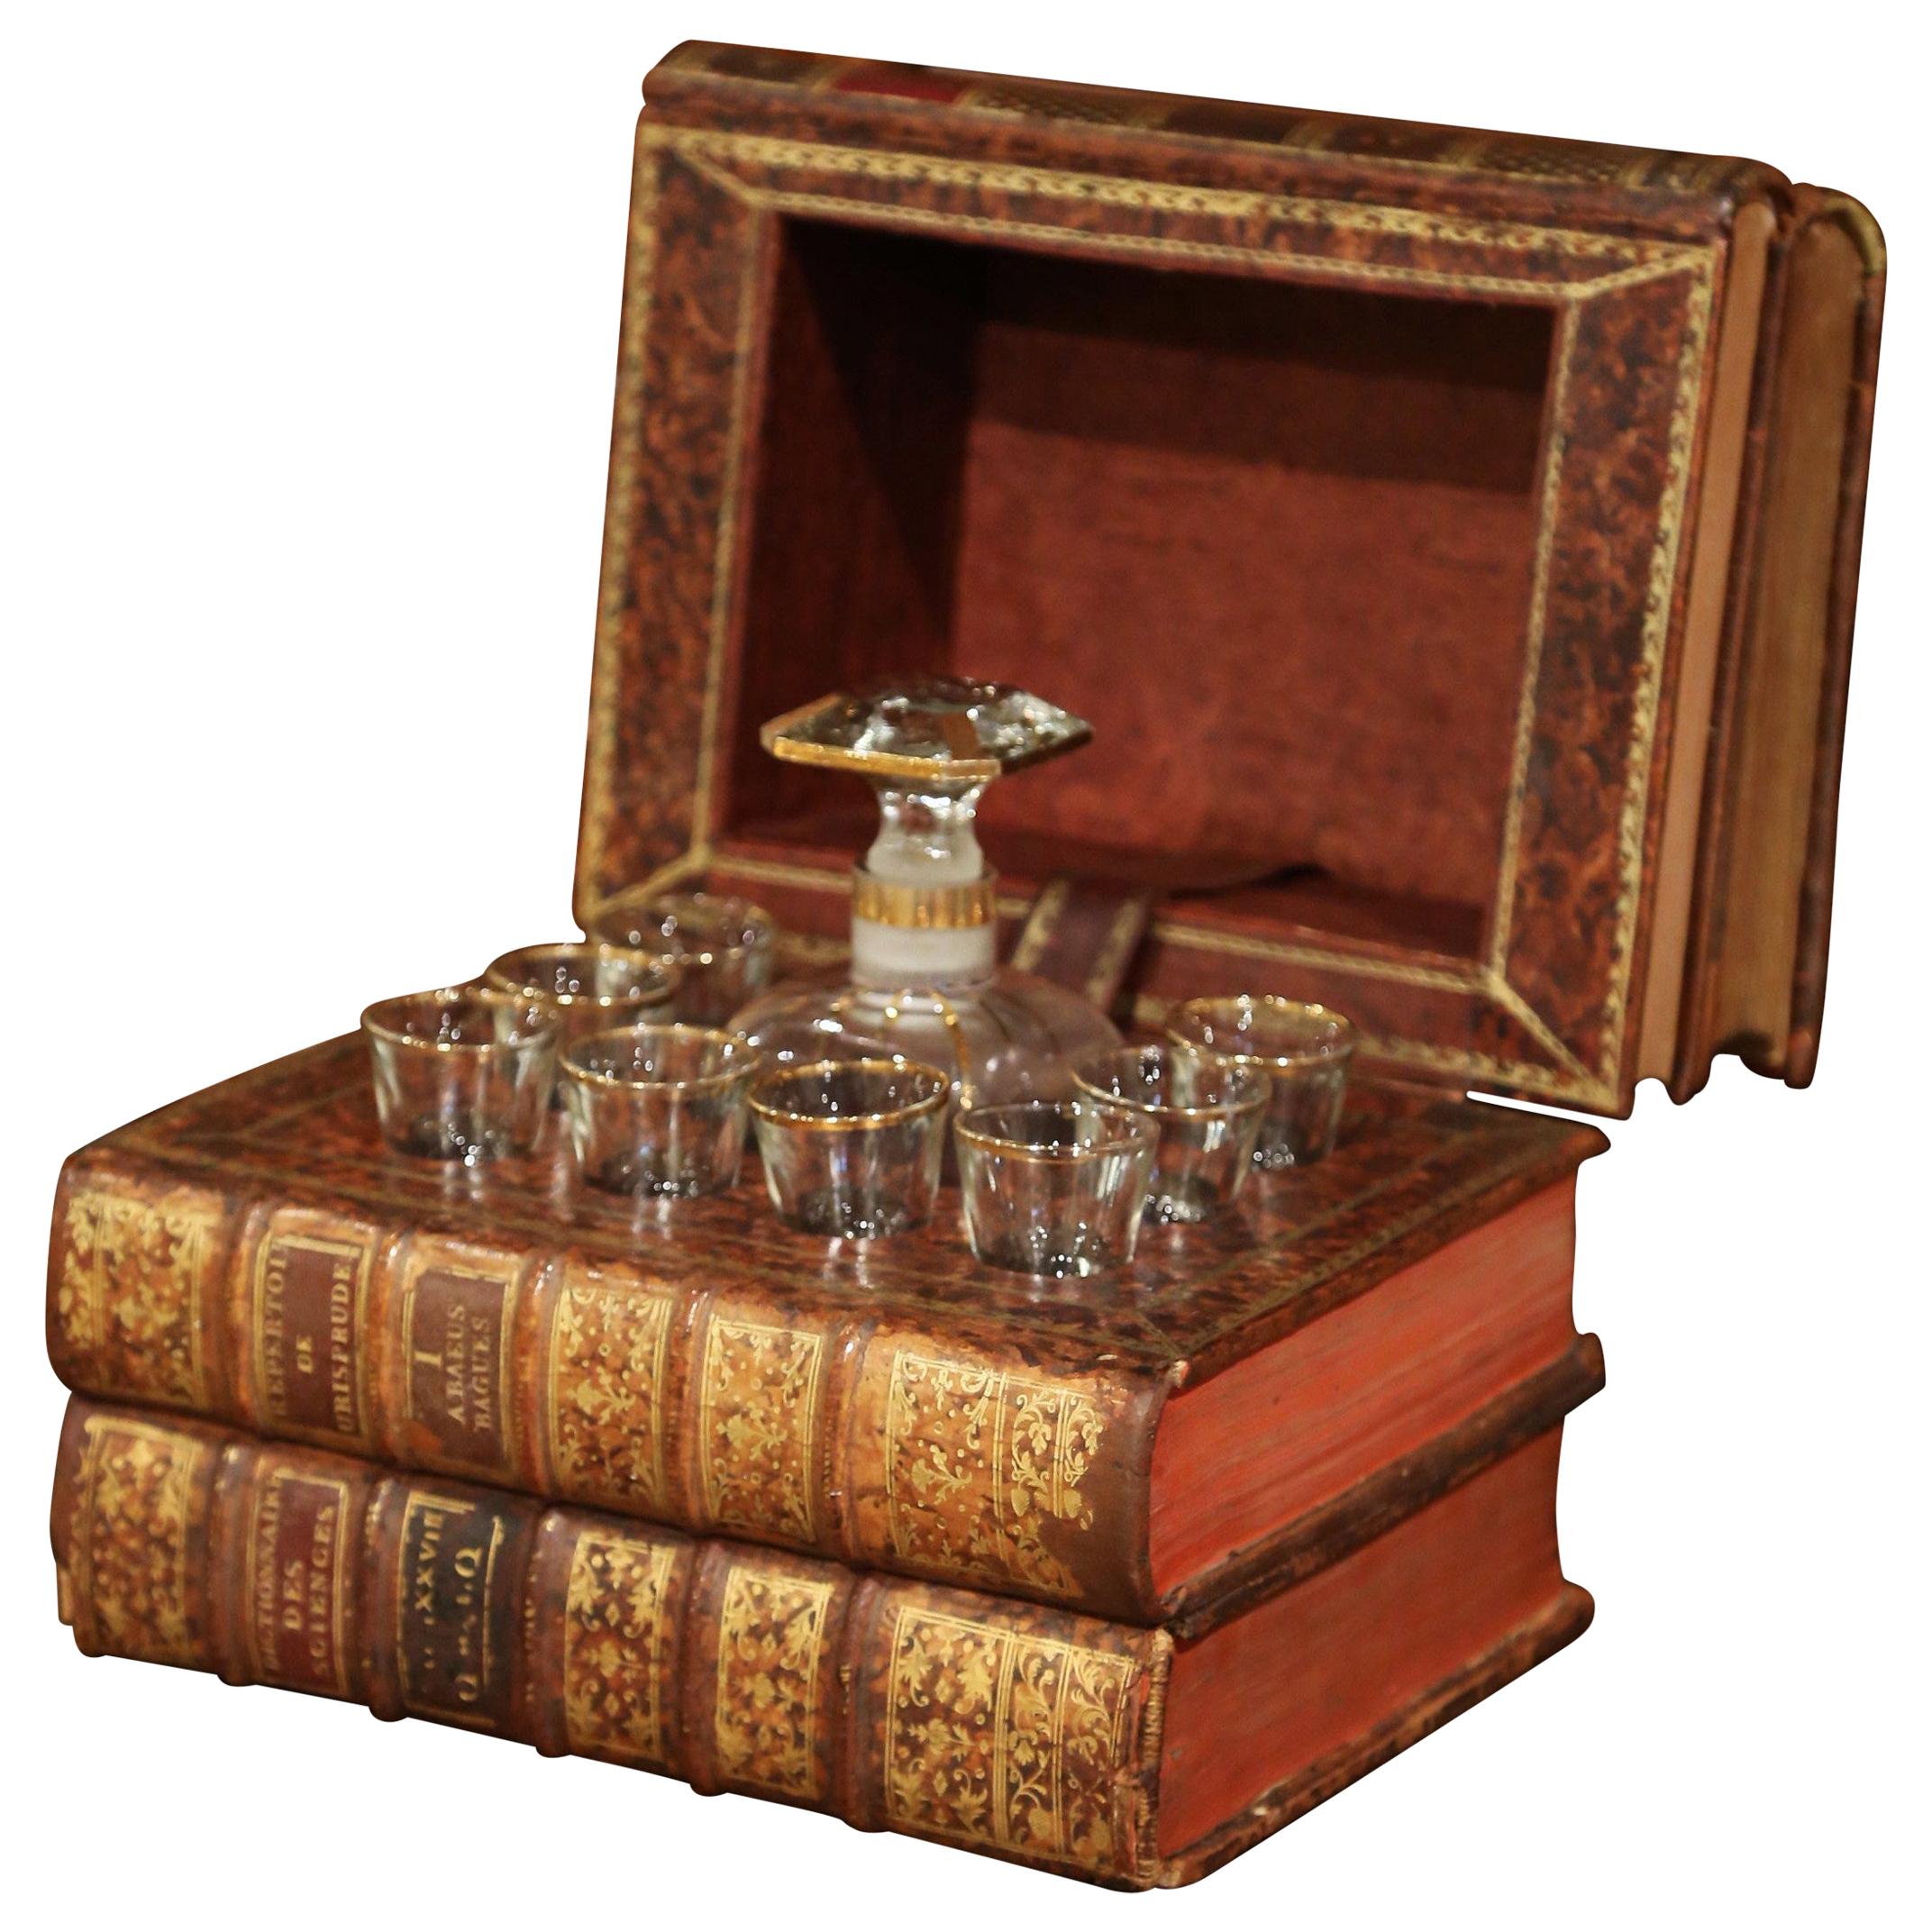 19th Century French Leather-Bound Book Liquor Box with 8 Shot Glasses and Carafe